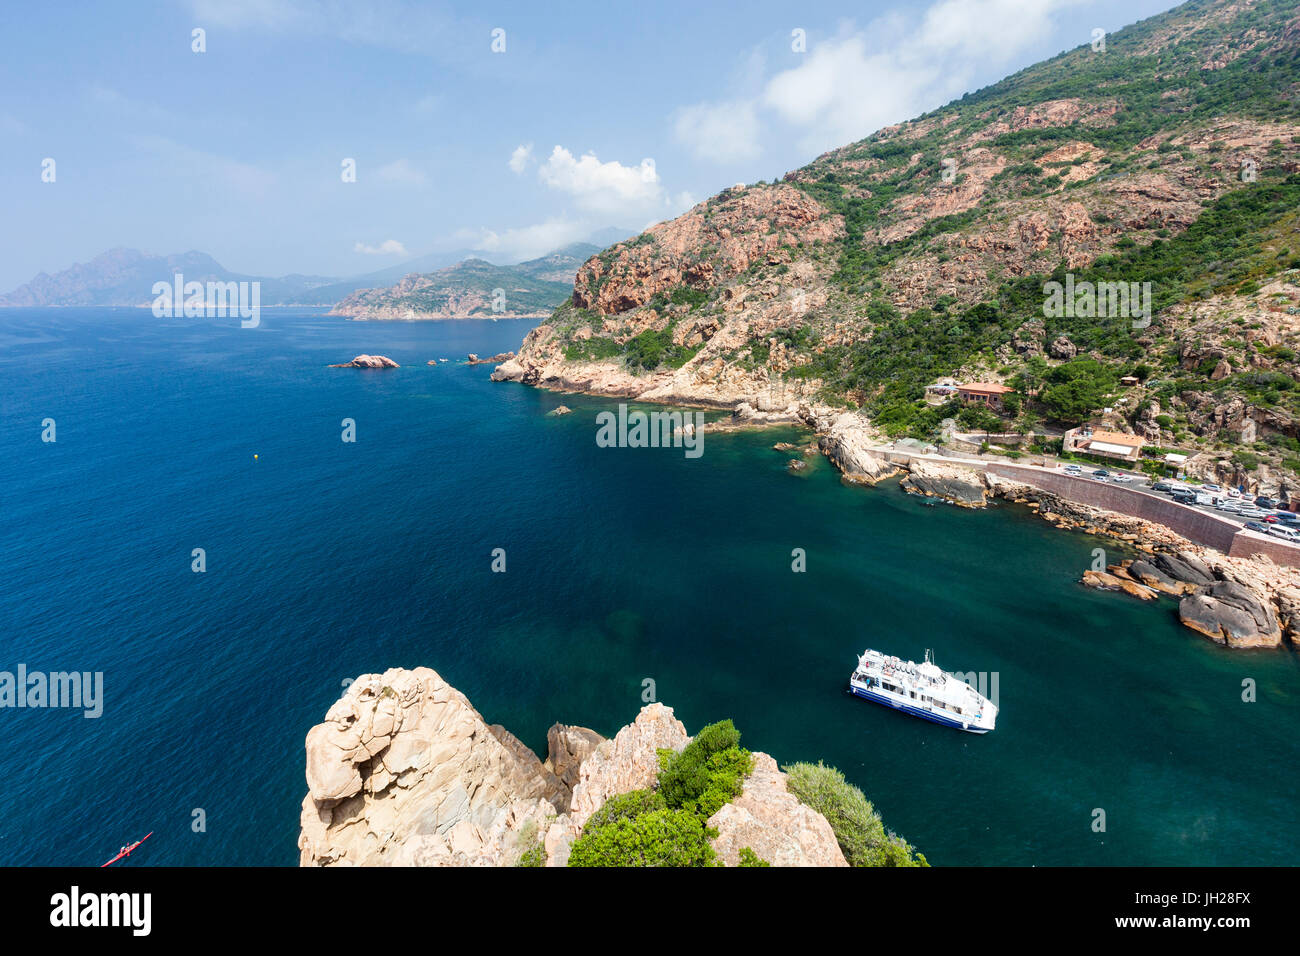 Tourist Boat High Resolution Stock Photography and Images - Alamy